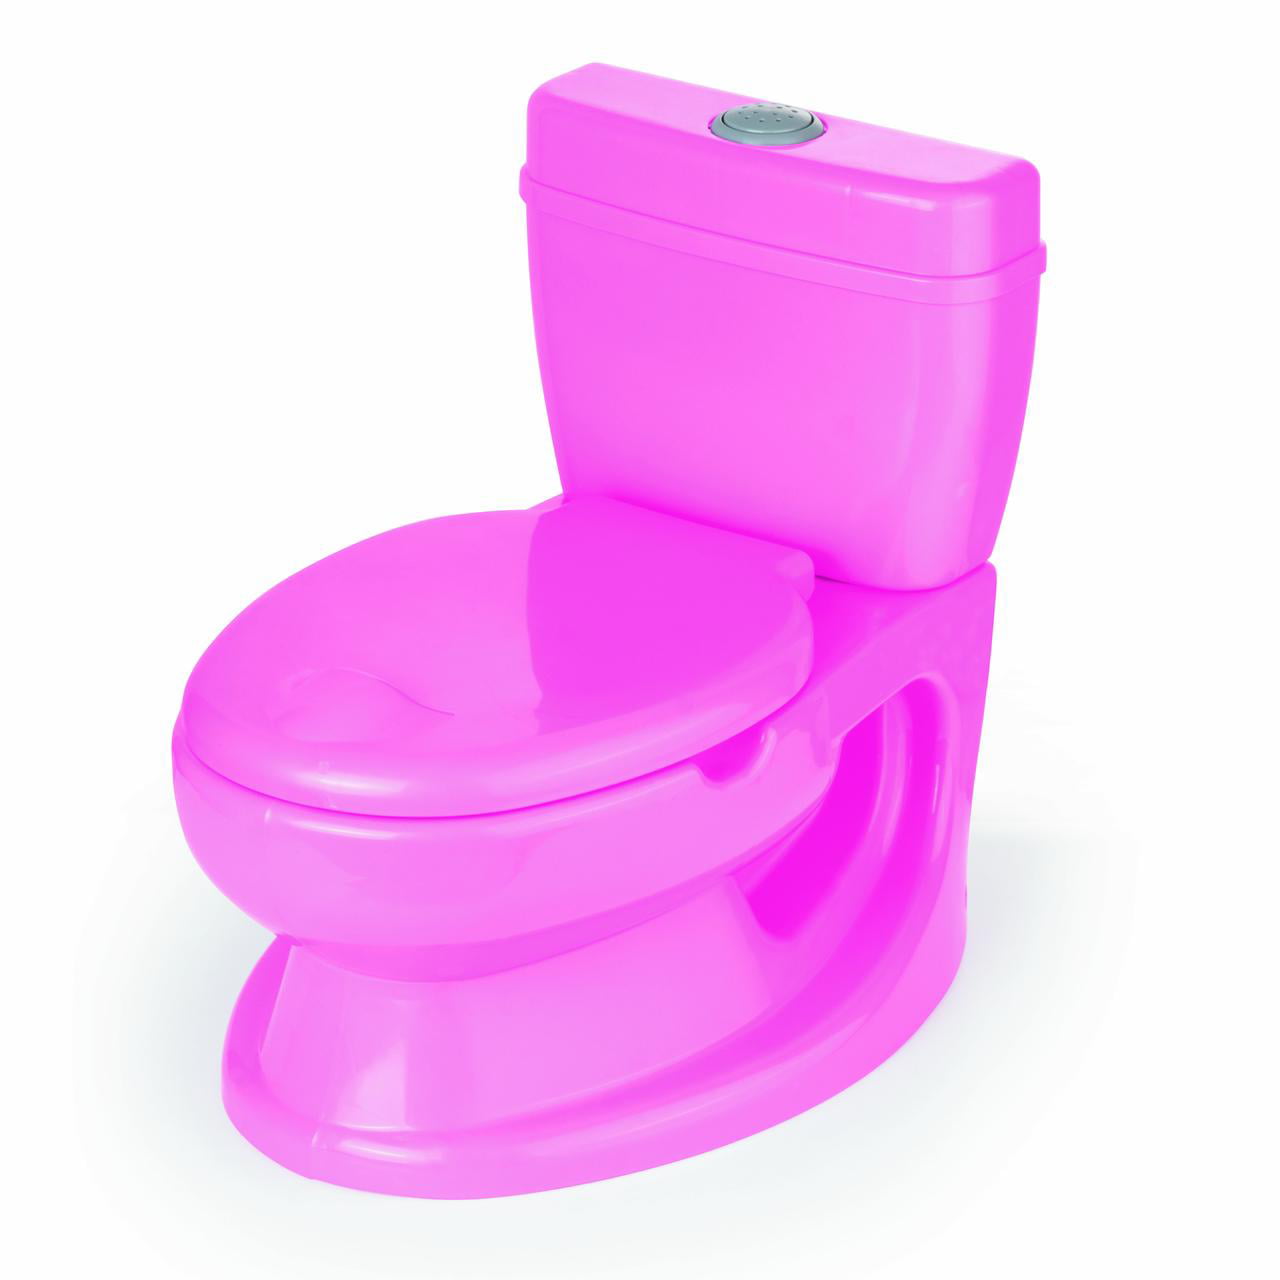 Multifunctional Childrens Toilet Baby Small Toilet Multi-Function Creative bb Toilet-Pink 